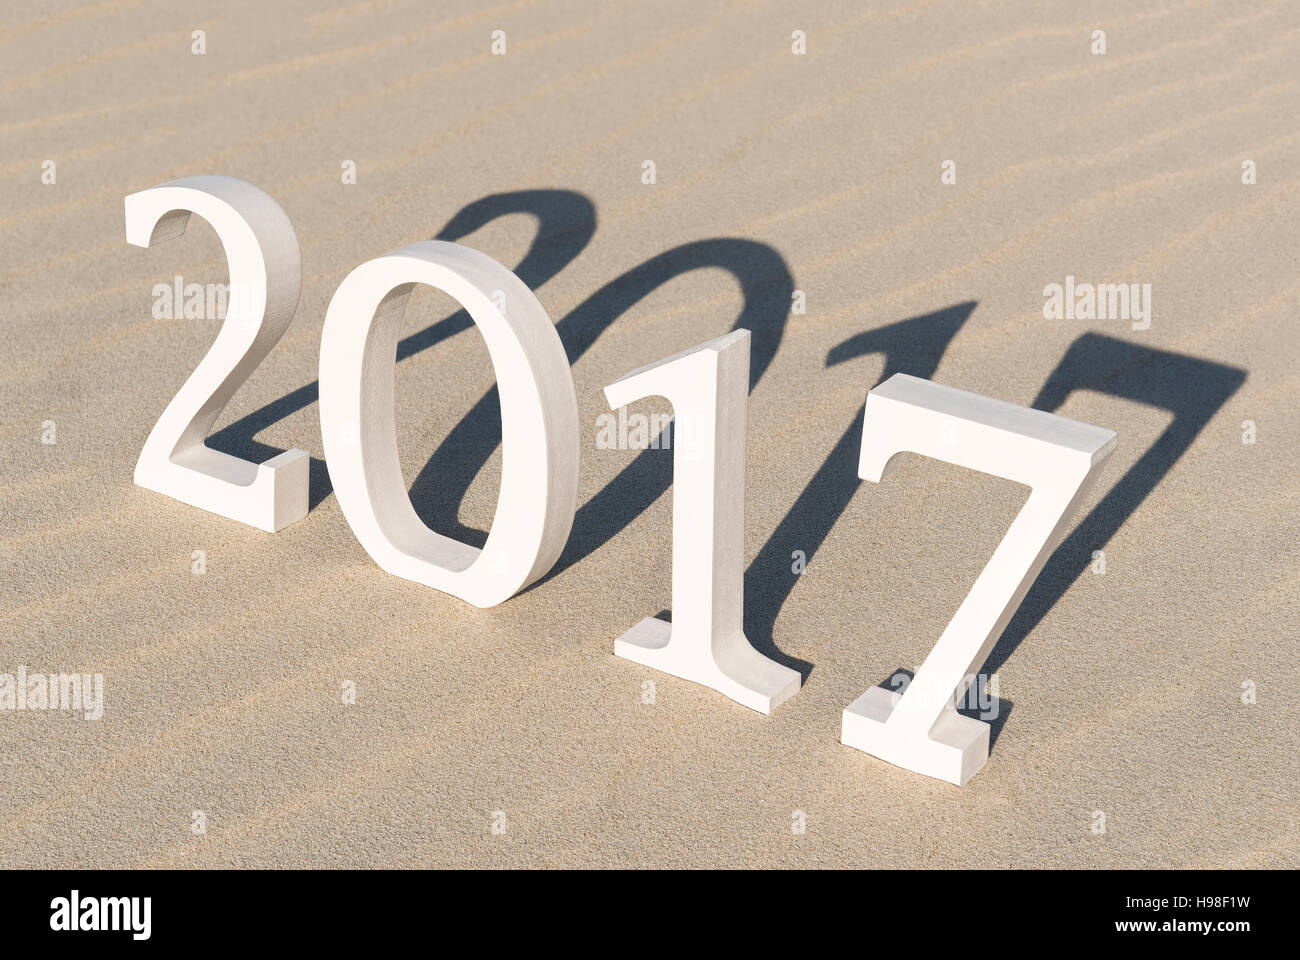 White wood figures on a beach forming the text two thousand seventeen as conceptual welcoming of the coming new year Stock Photo